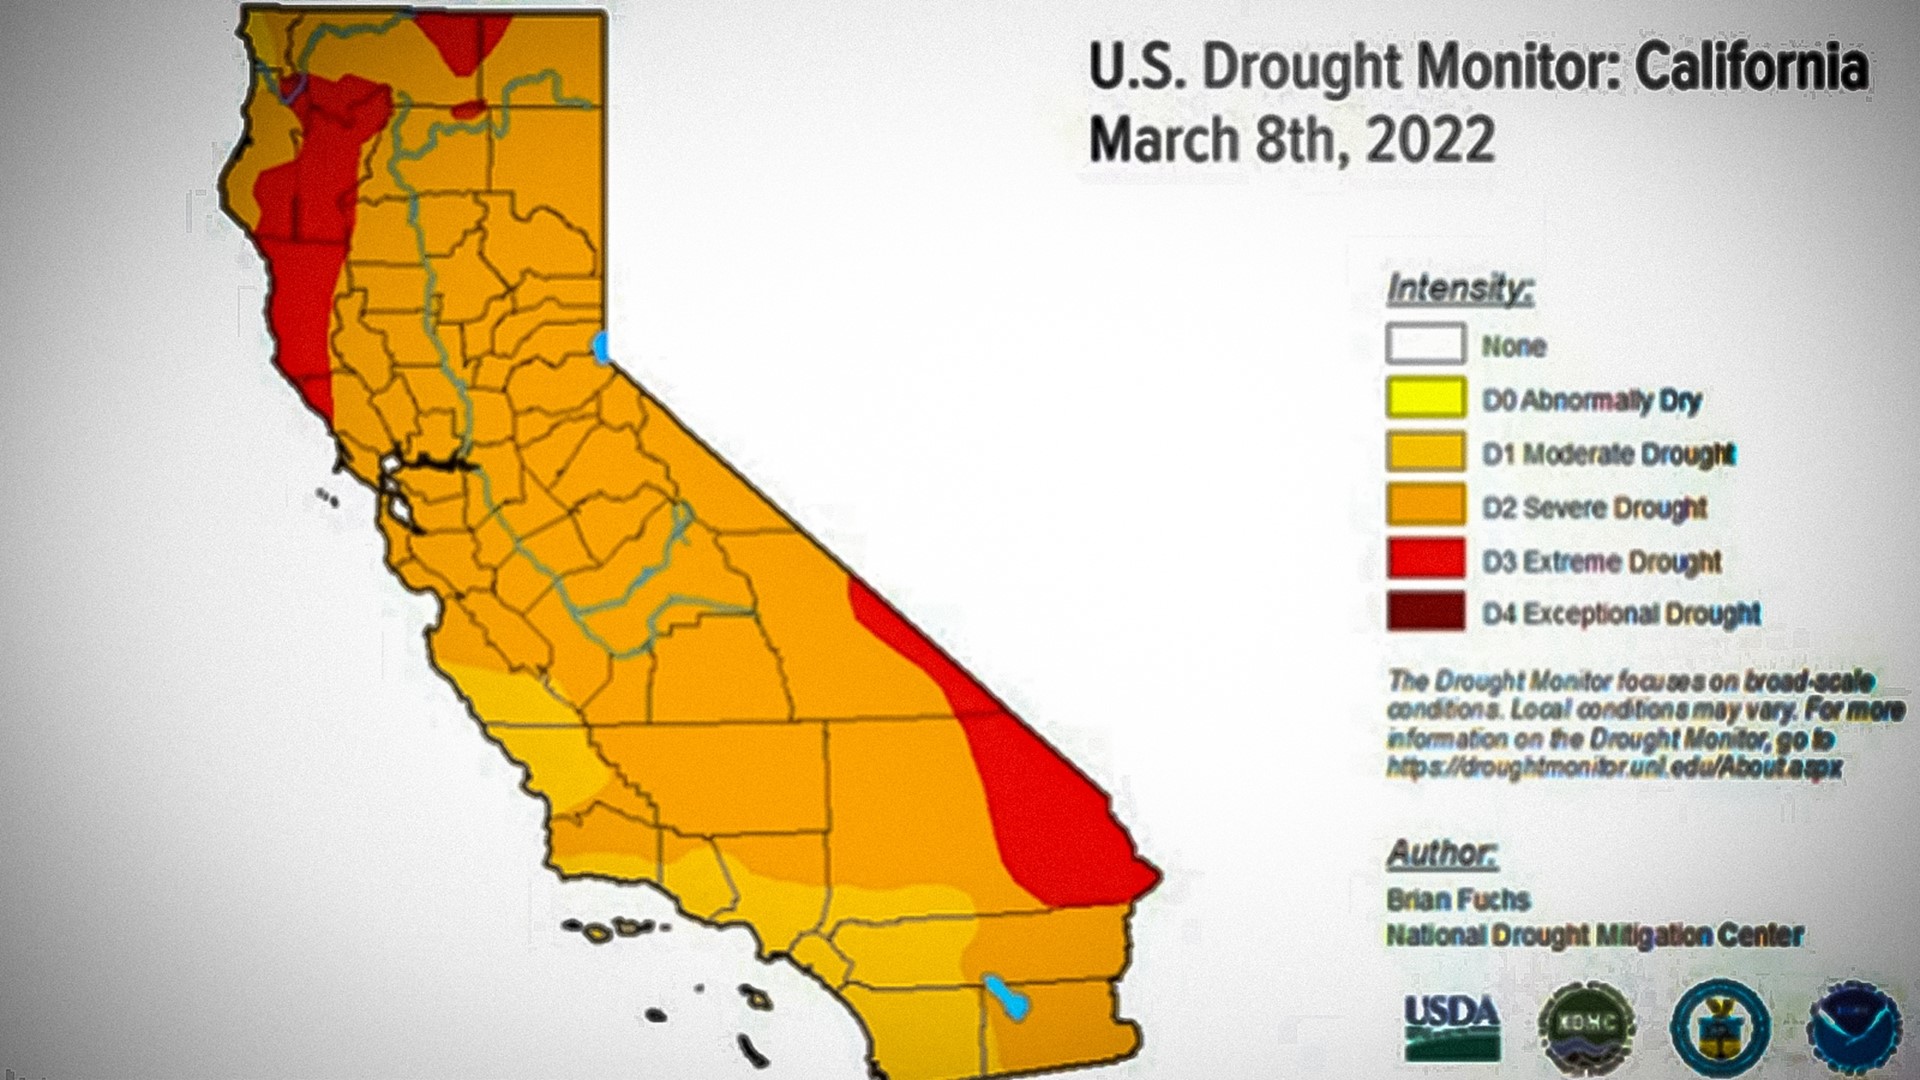 Our Monica Coleman reports that while drought conditions have improved over the past six months, we still have a long ways to go before we are out of the woods.